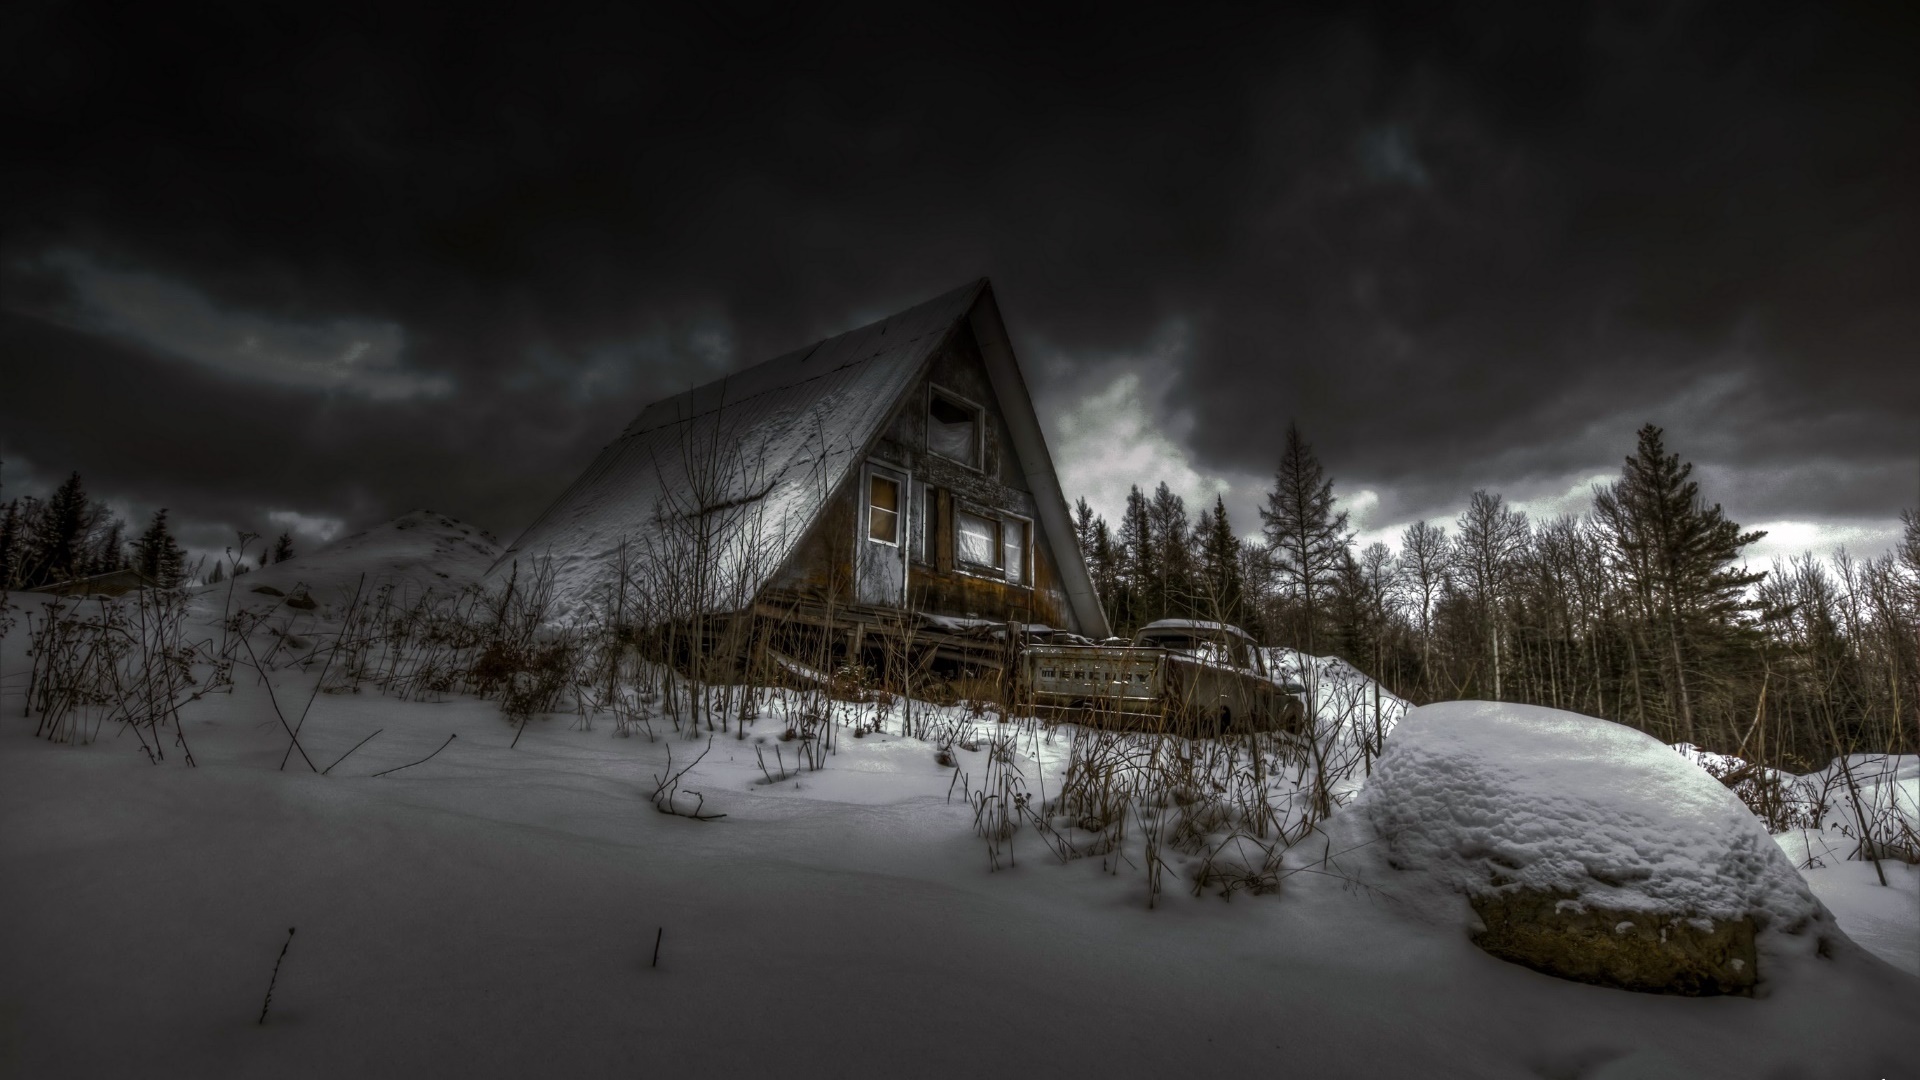 General 1920x1080 dark house sky winter cold snow cabin forest landscape HDR overcast abandoned